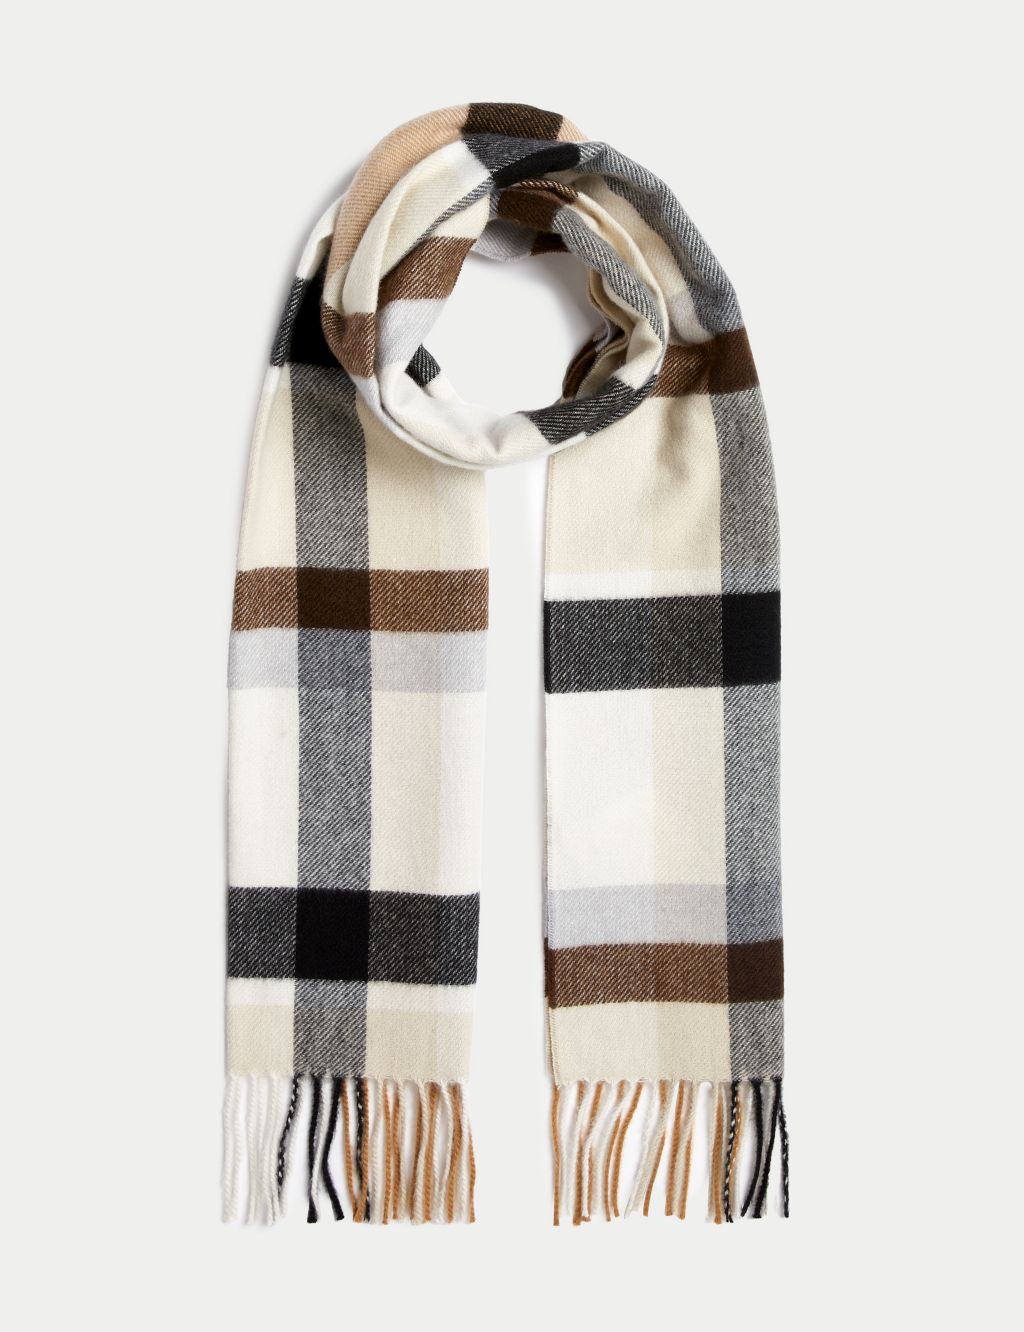 Woven Checked Tassel Scarf image 1